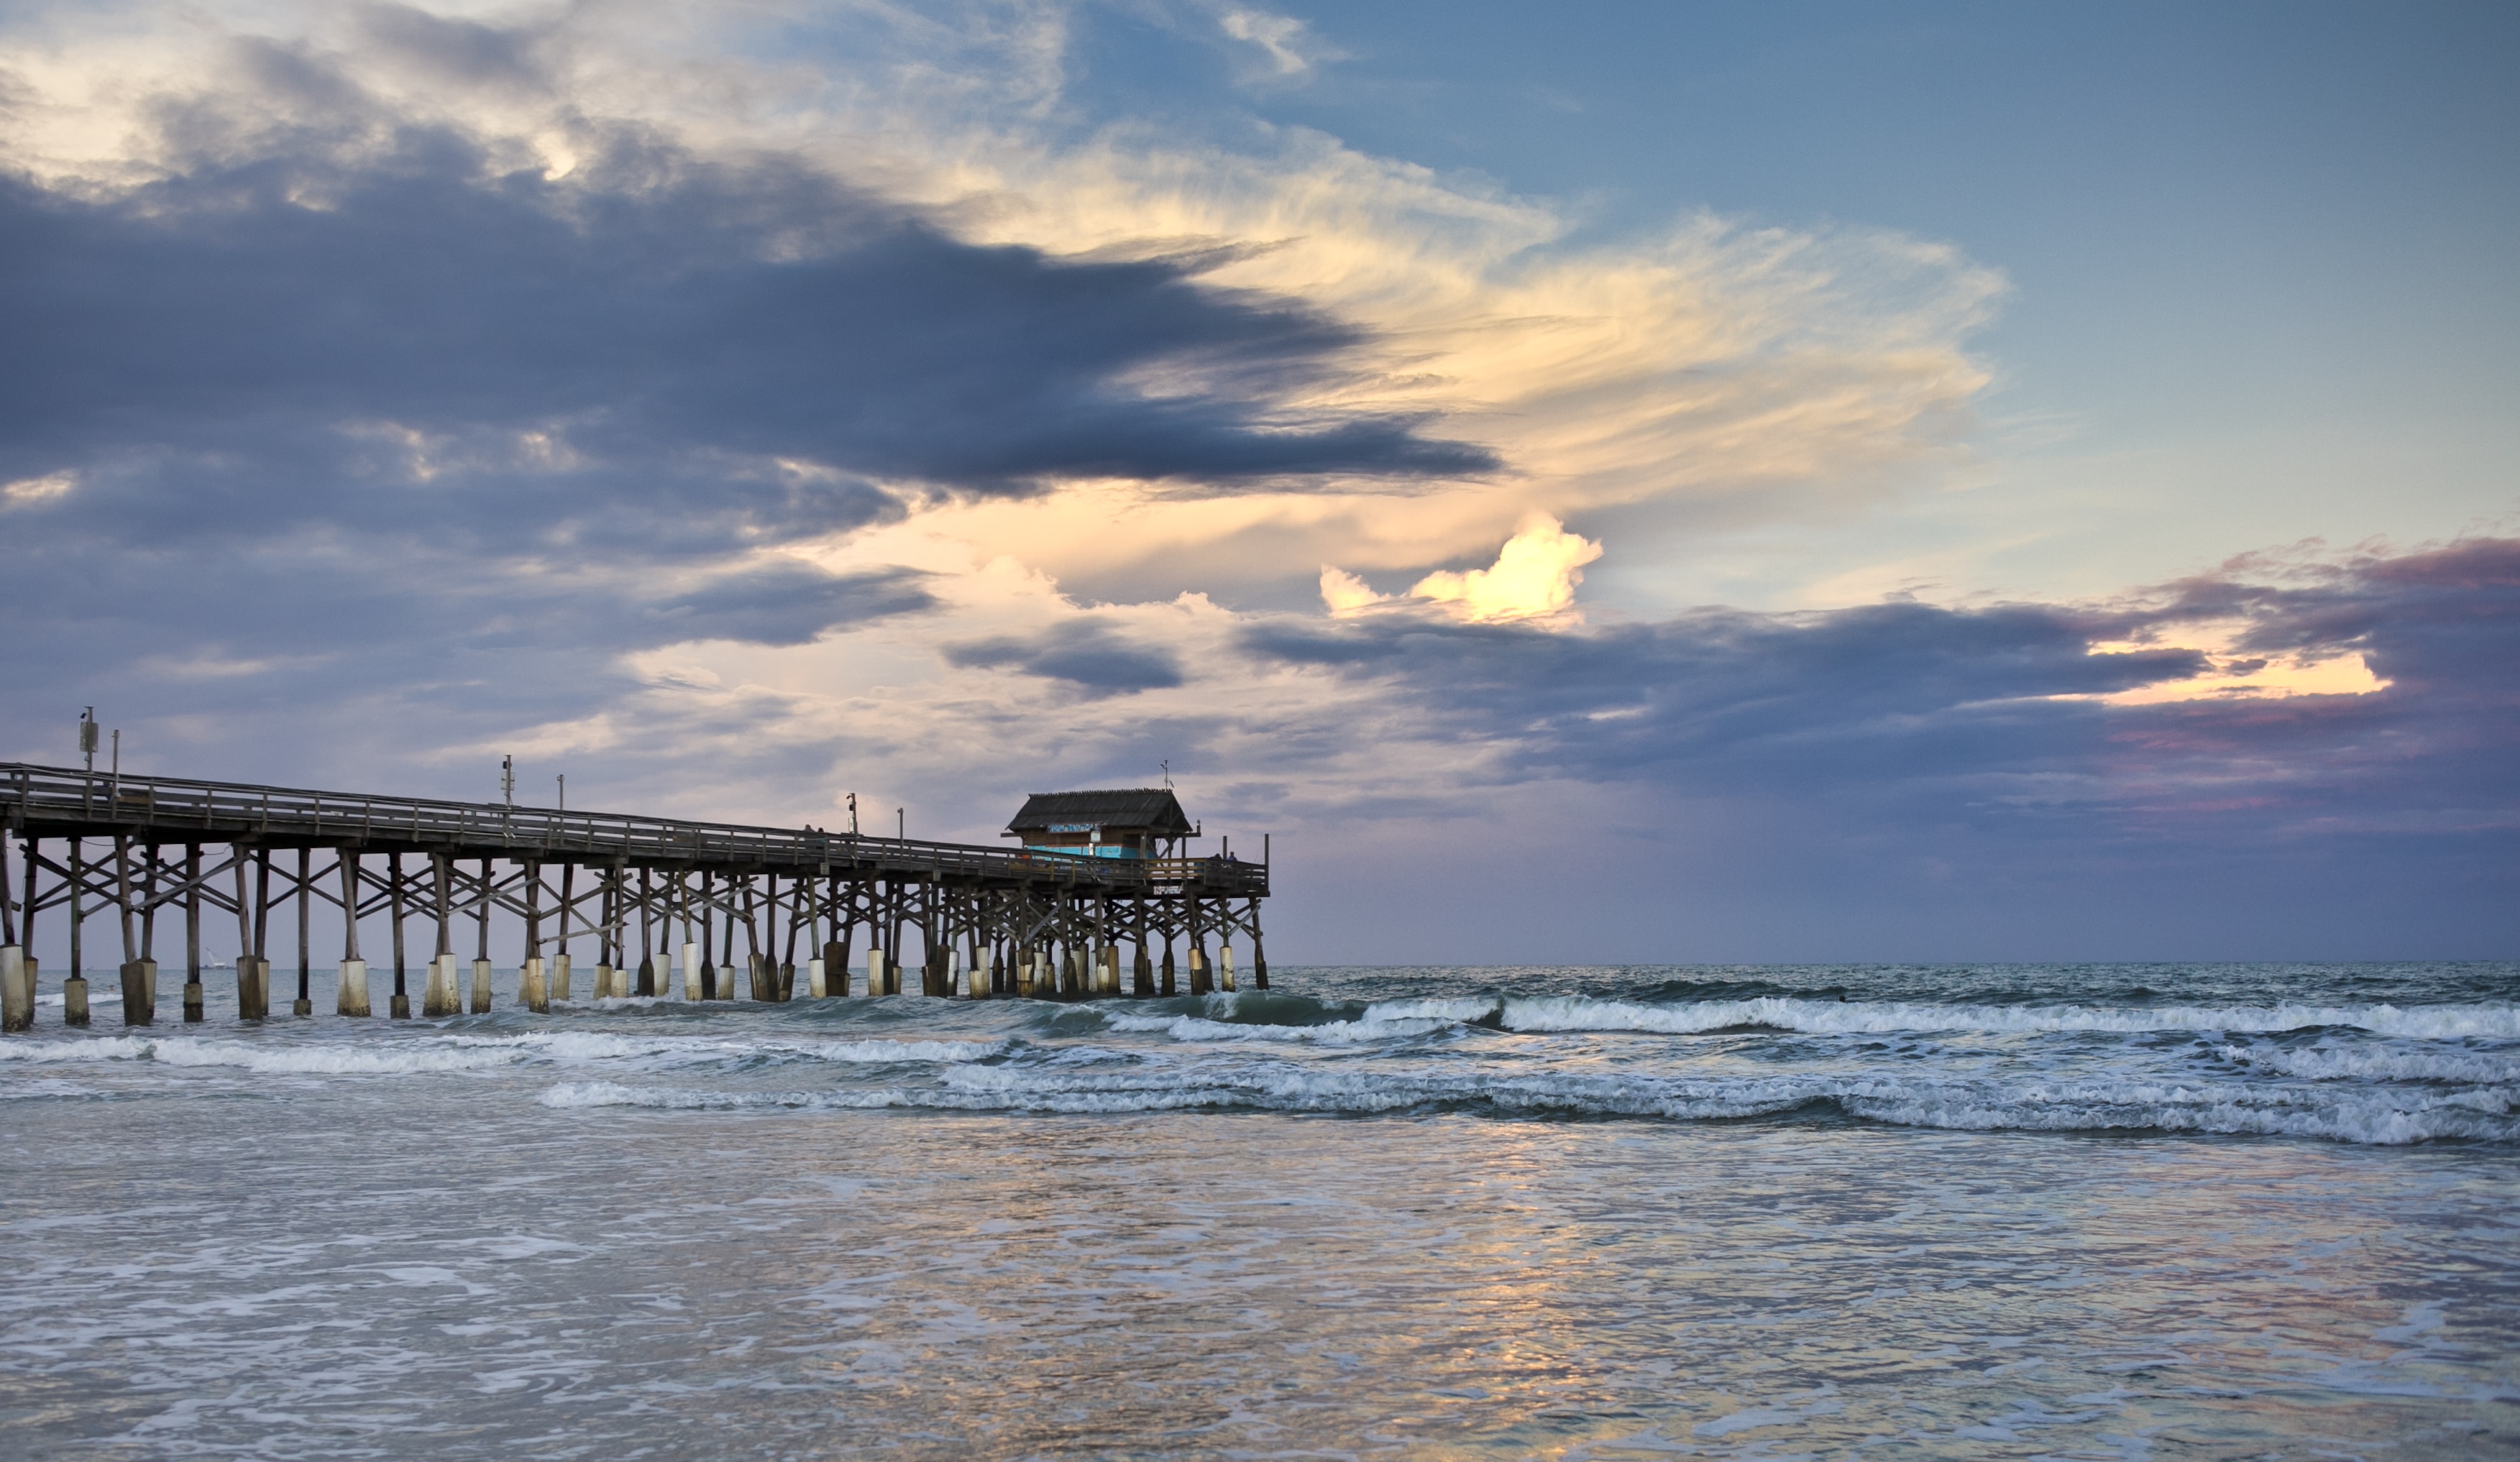 The Top 10 Cocoa Beach Tours Tickets & Activities 2021